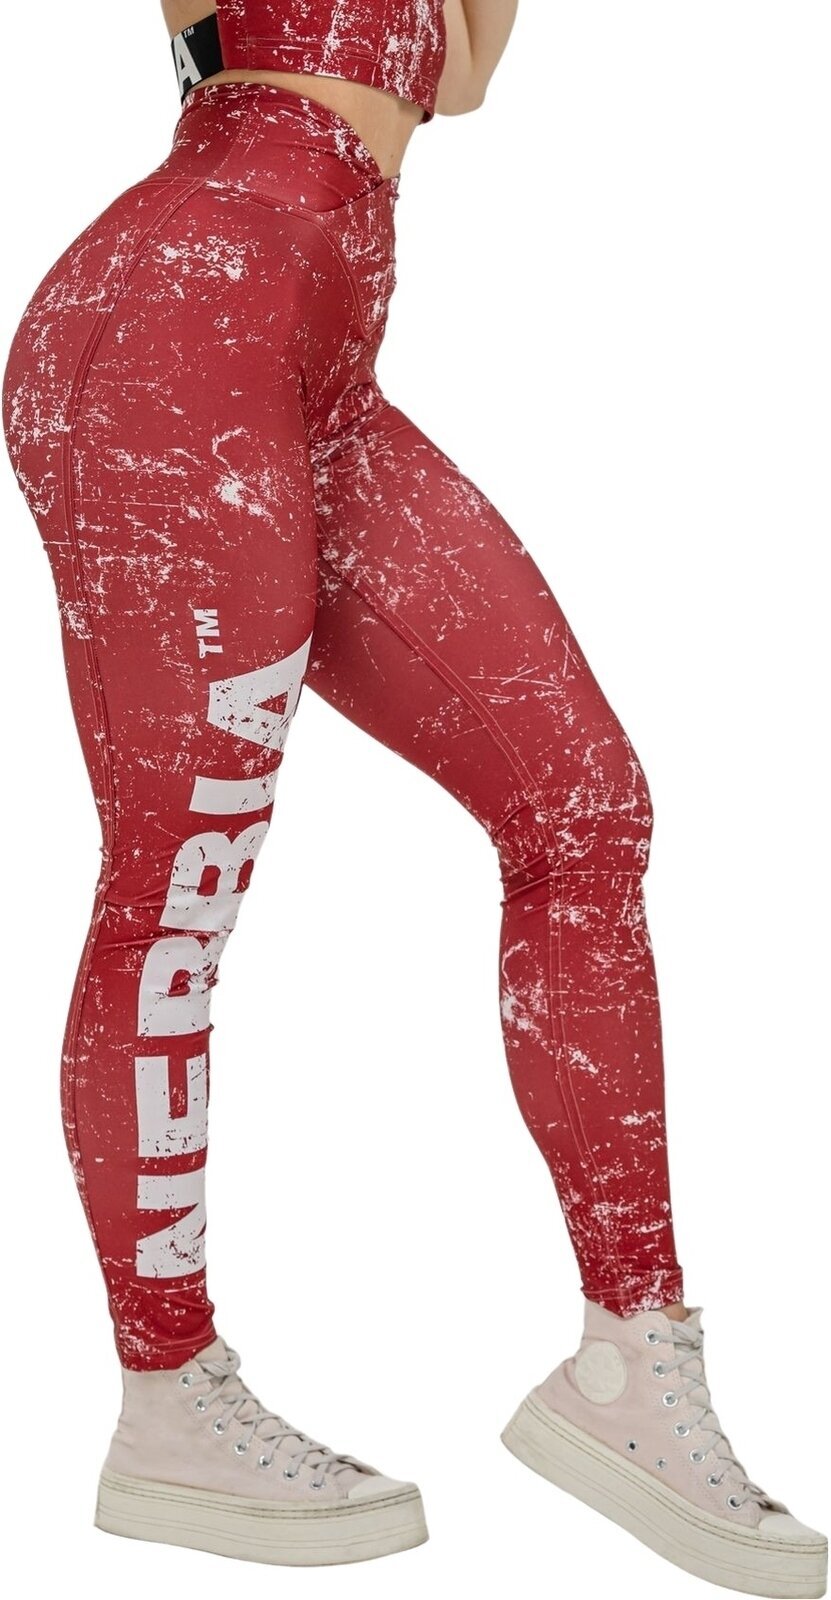 Fitness Trousers Nebbia Workout Leggings Rough Girl Red S Fitness Trousers